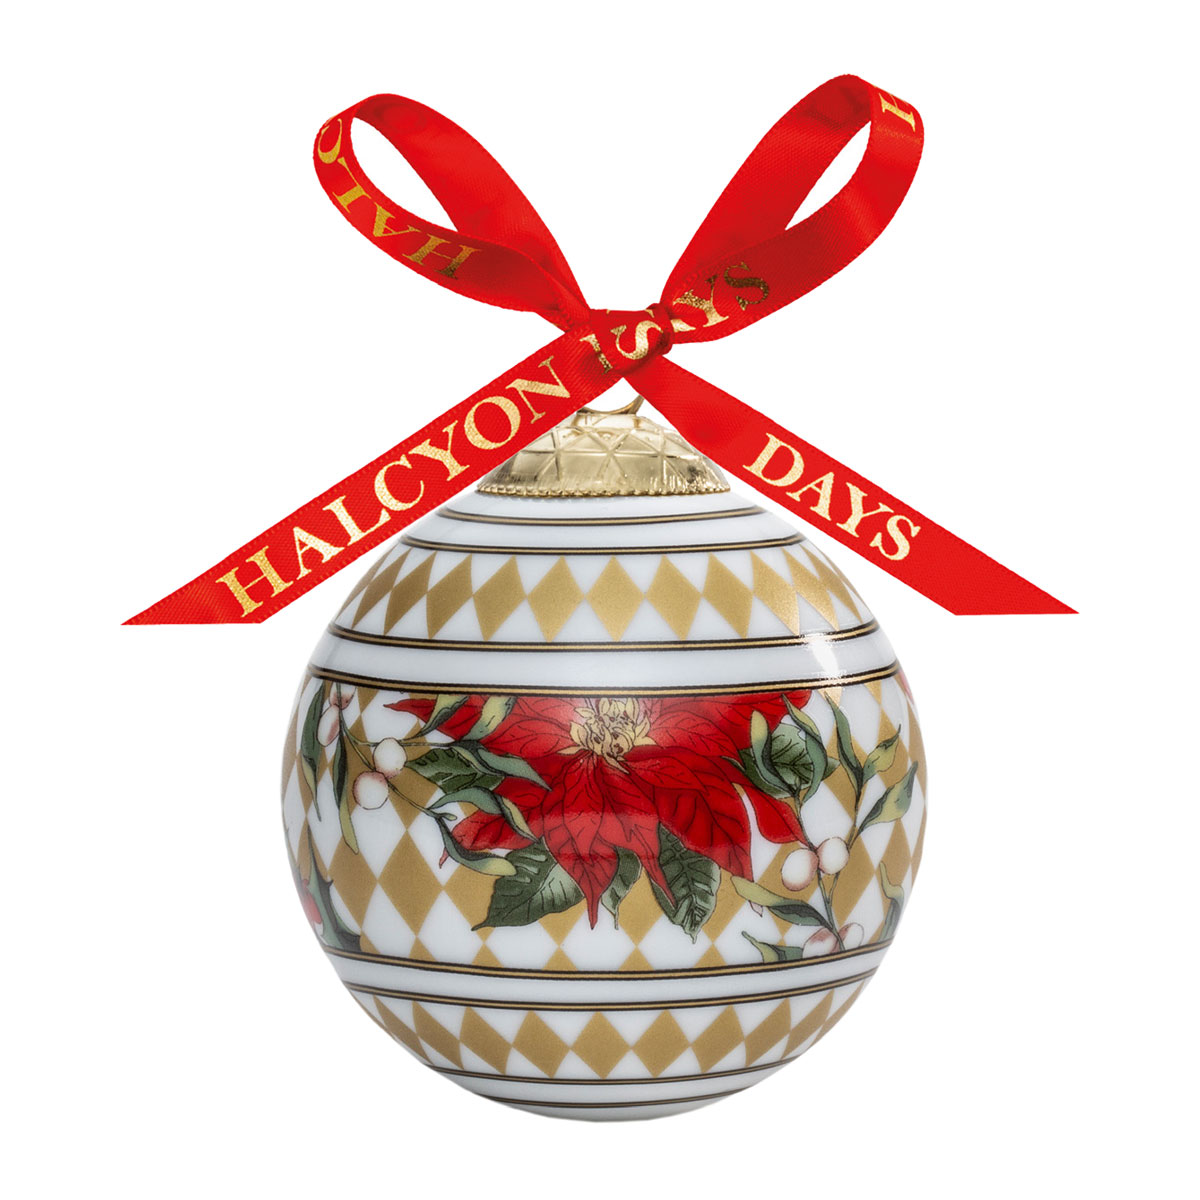 Halcyon Days 2023 Parterre Gold with Poinsettia Bauble Ornament